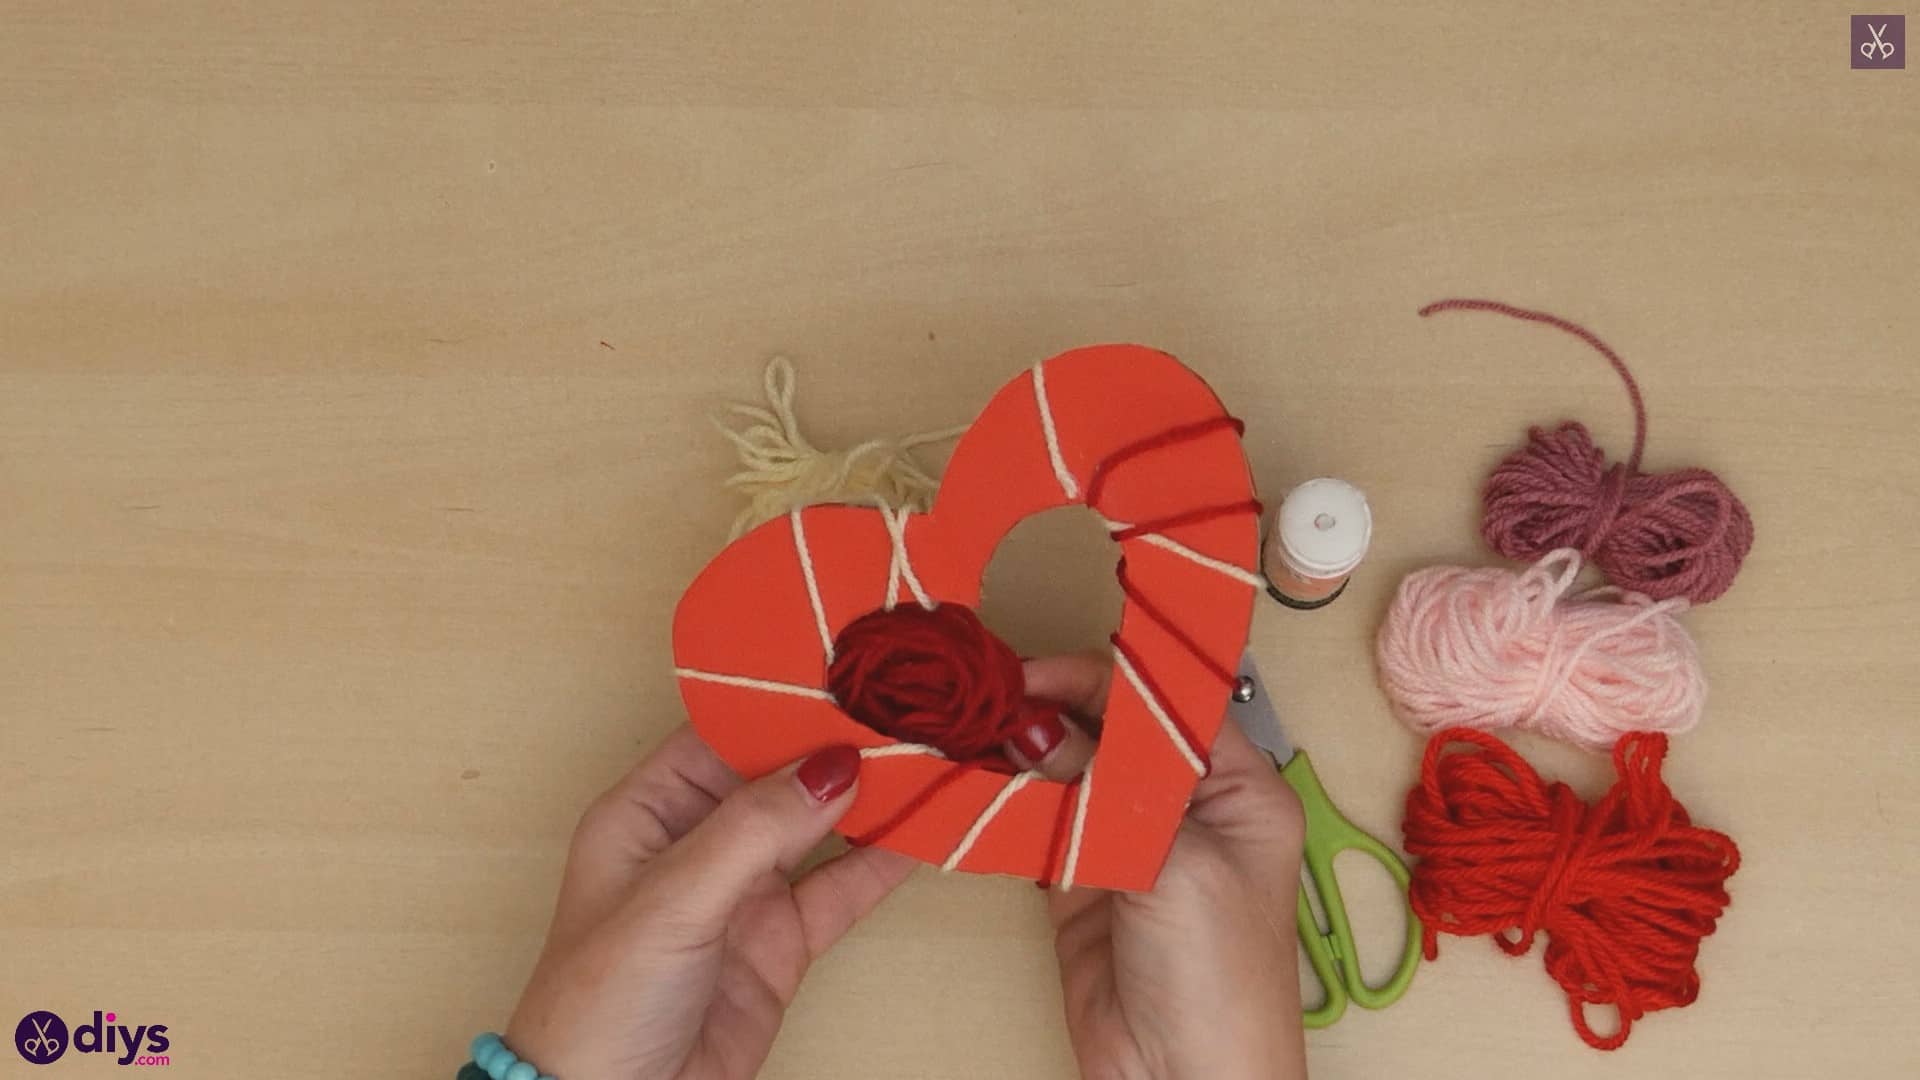 Diy yarn wrapped paper heart step 6